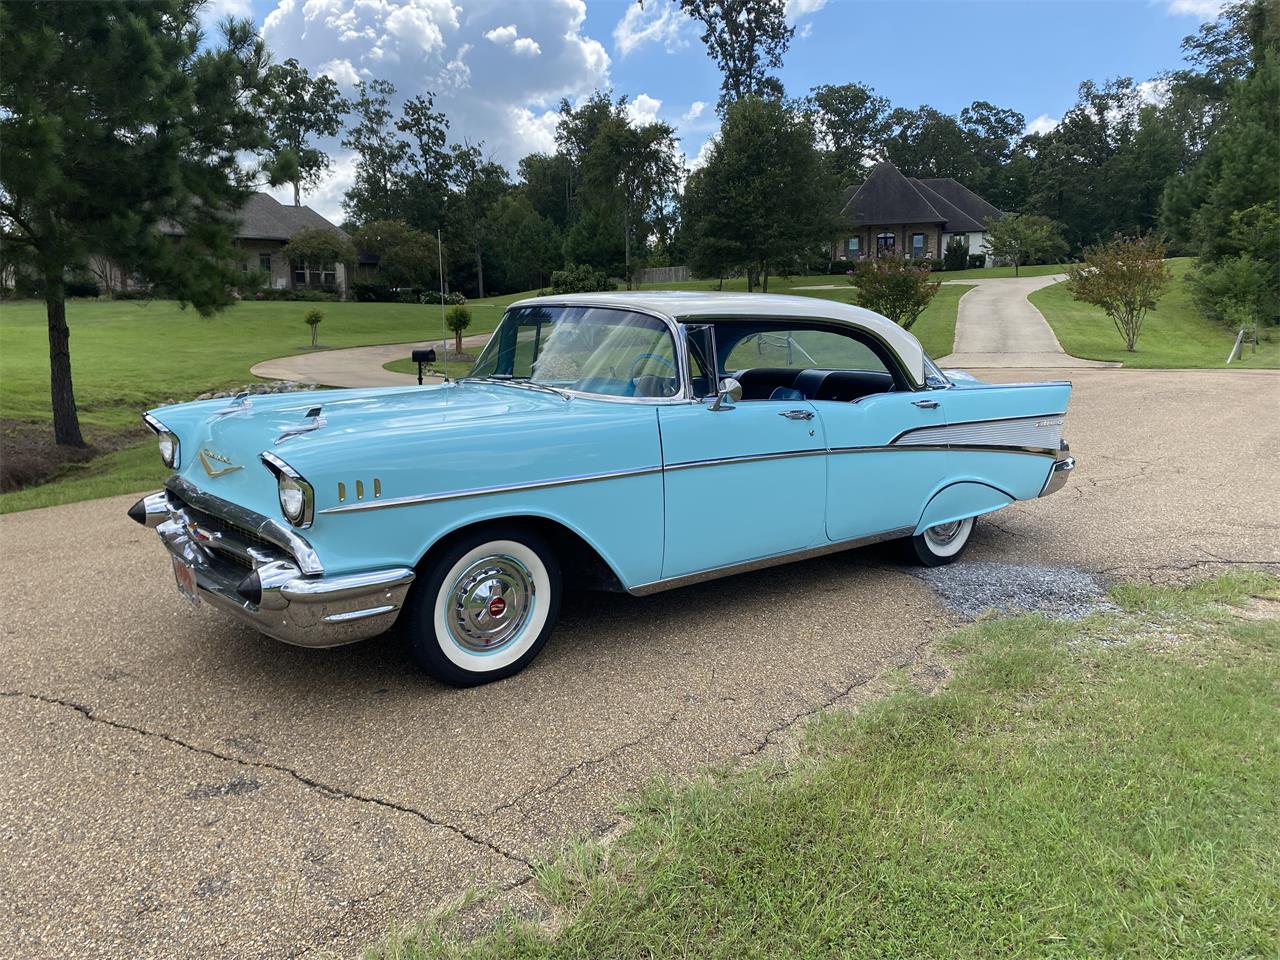 1957 chevrolet bel air, Pick of the Day: 1957 Chevrolet Bel Air, ClassicCars.com Journal